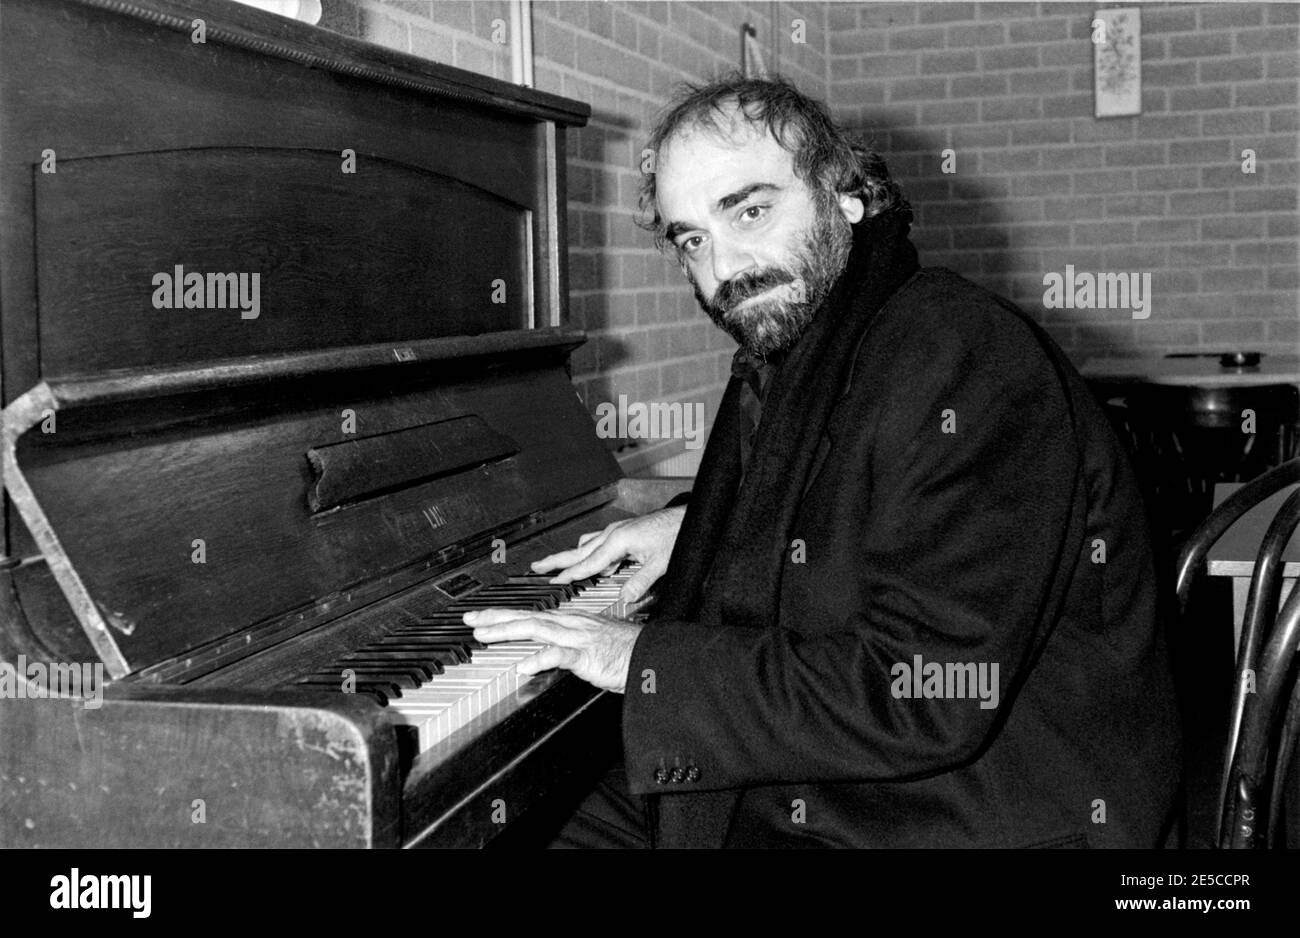 HILVERSUM, THE NETHERLANDS - OCT 19, 1986: Demis Roussos was a Greek vocalist and performer who had an internationally acclaimed career, as a single r Stock Photo